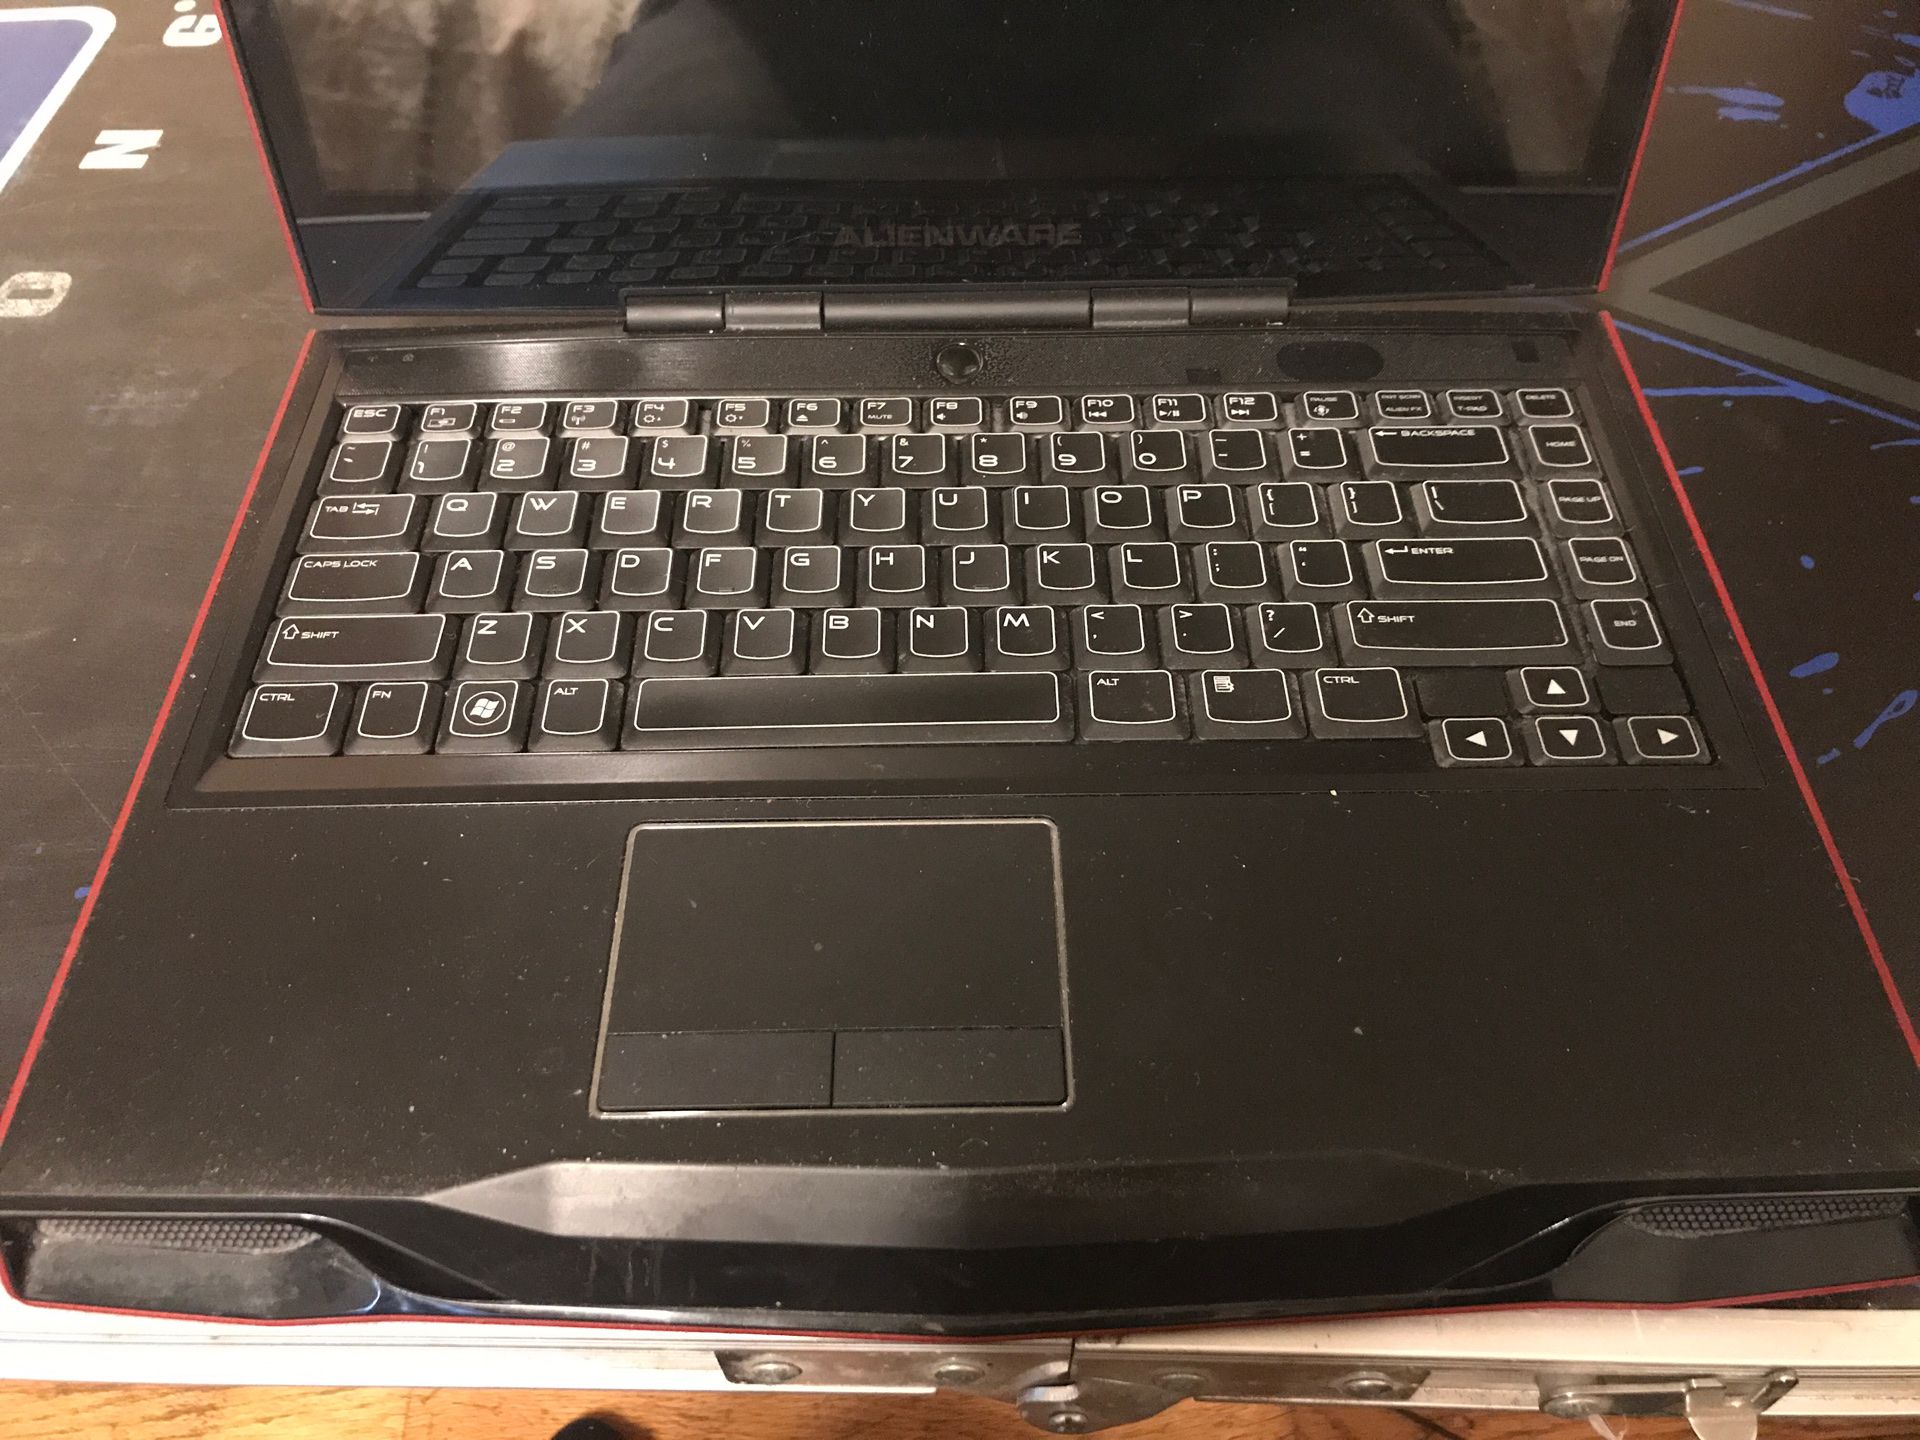 AlienWare Gaming computer charger NOT included( uses any dell laptop charger)